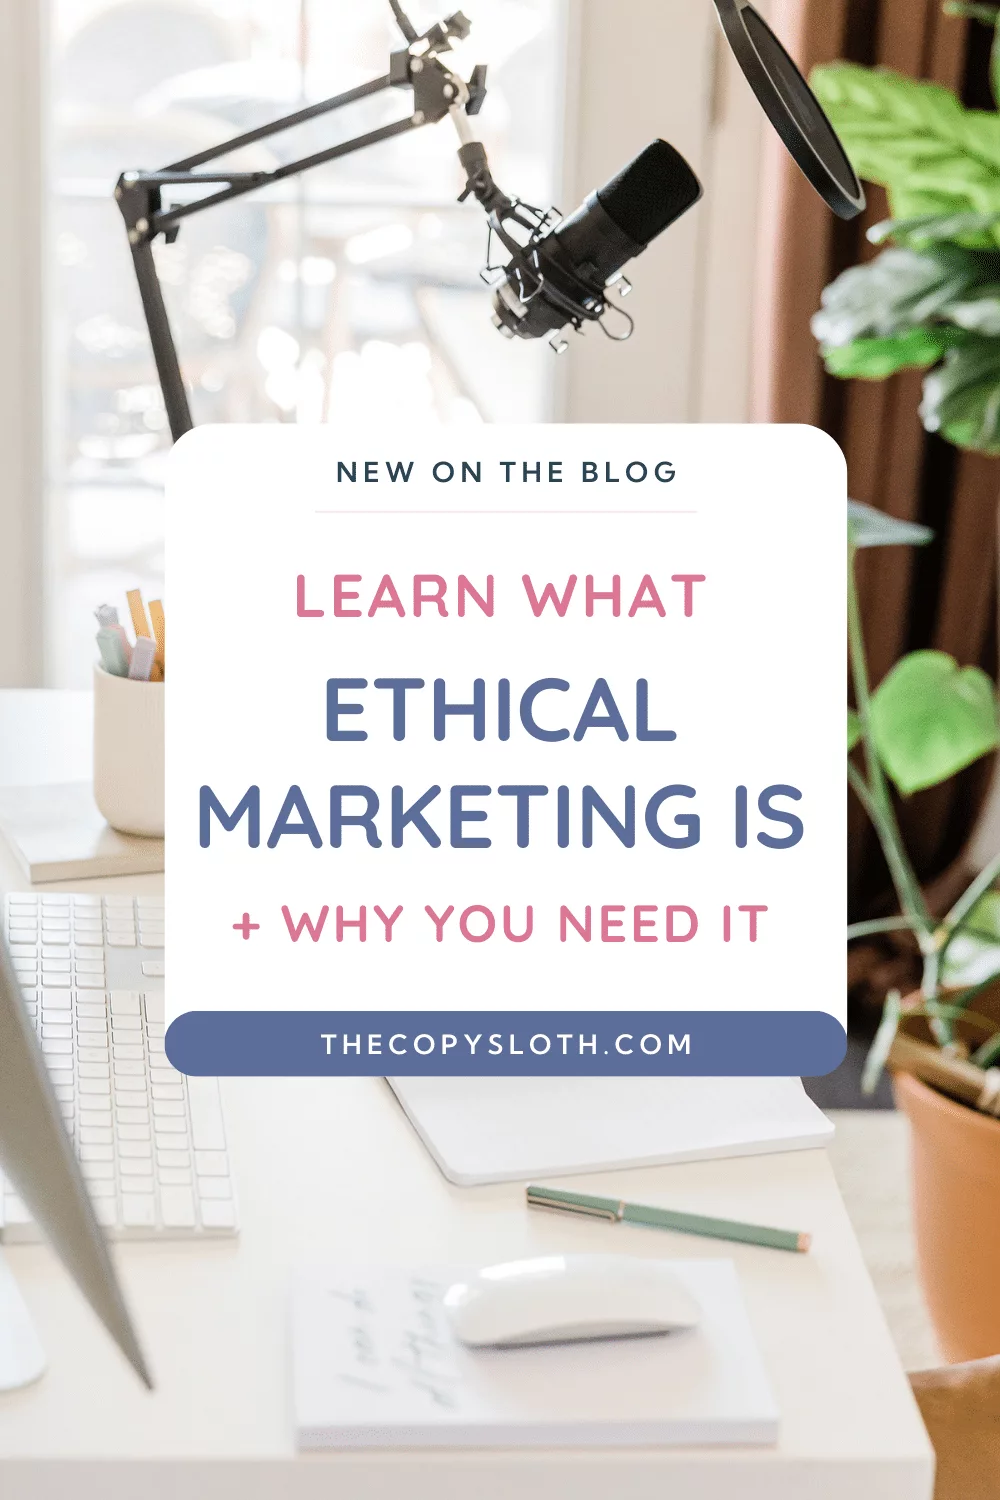 Learn what ethical marketing is and why you need it.